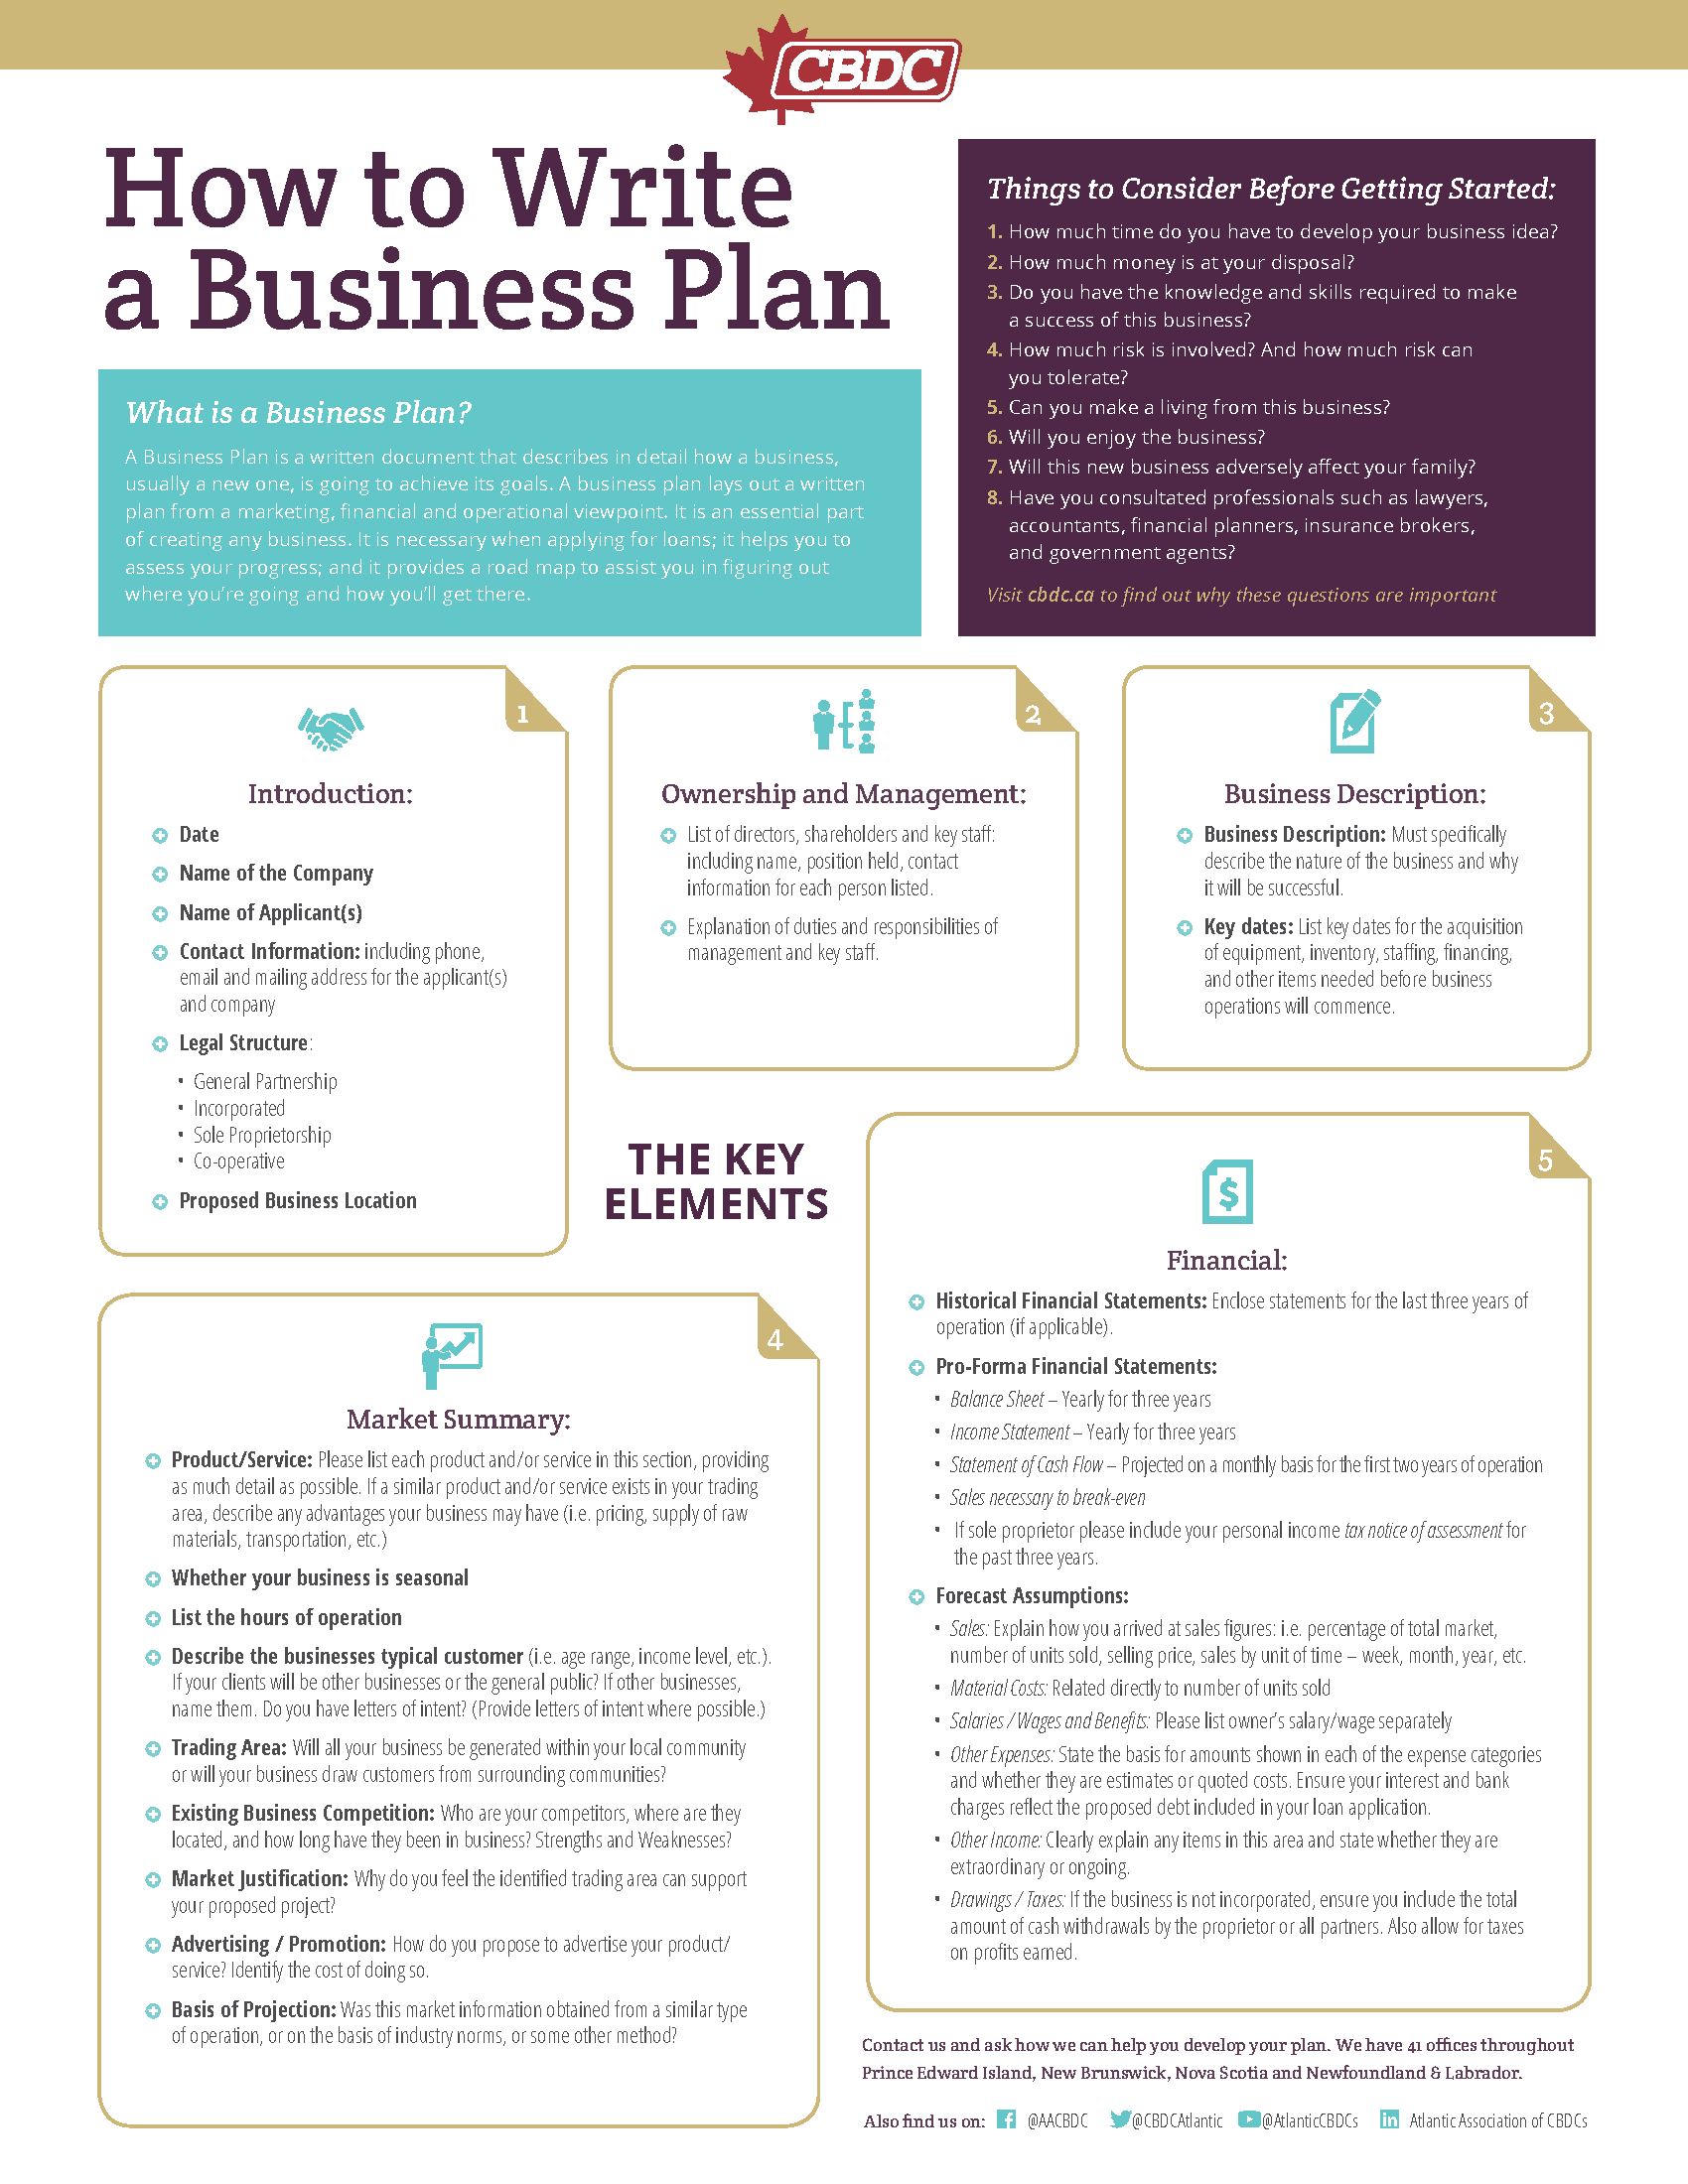 define business plan with a suitable example